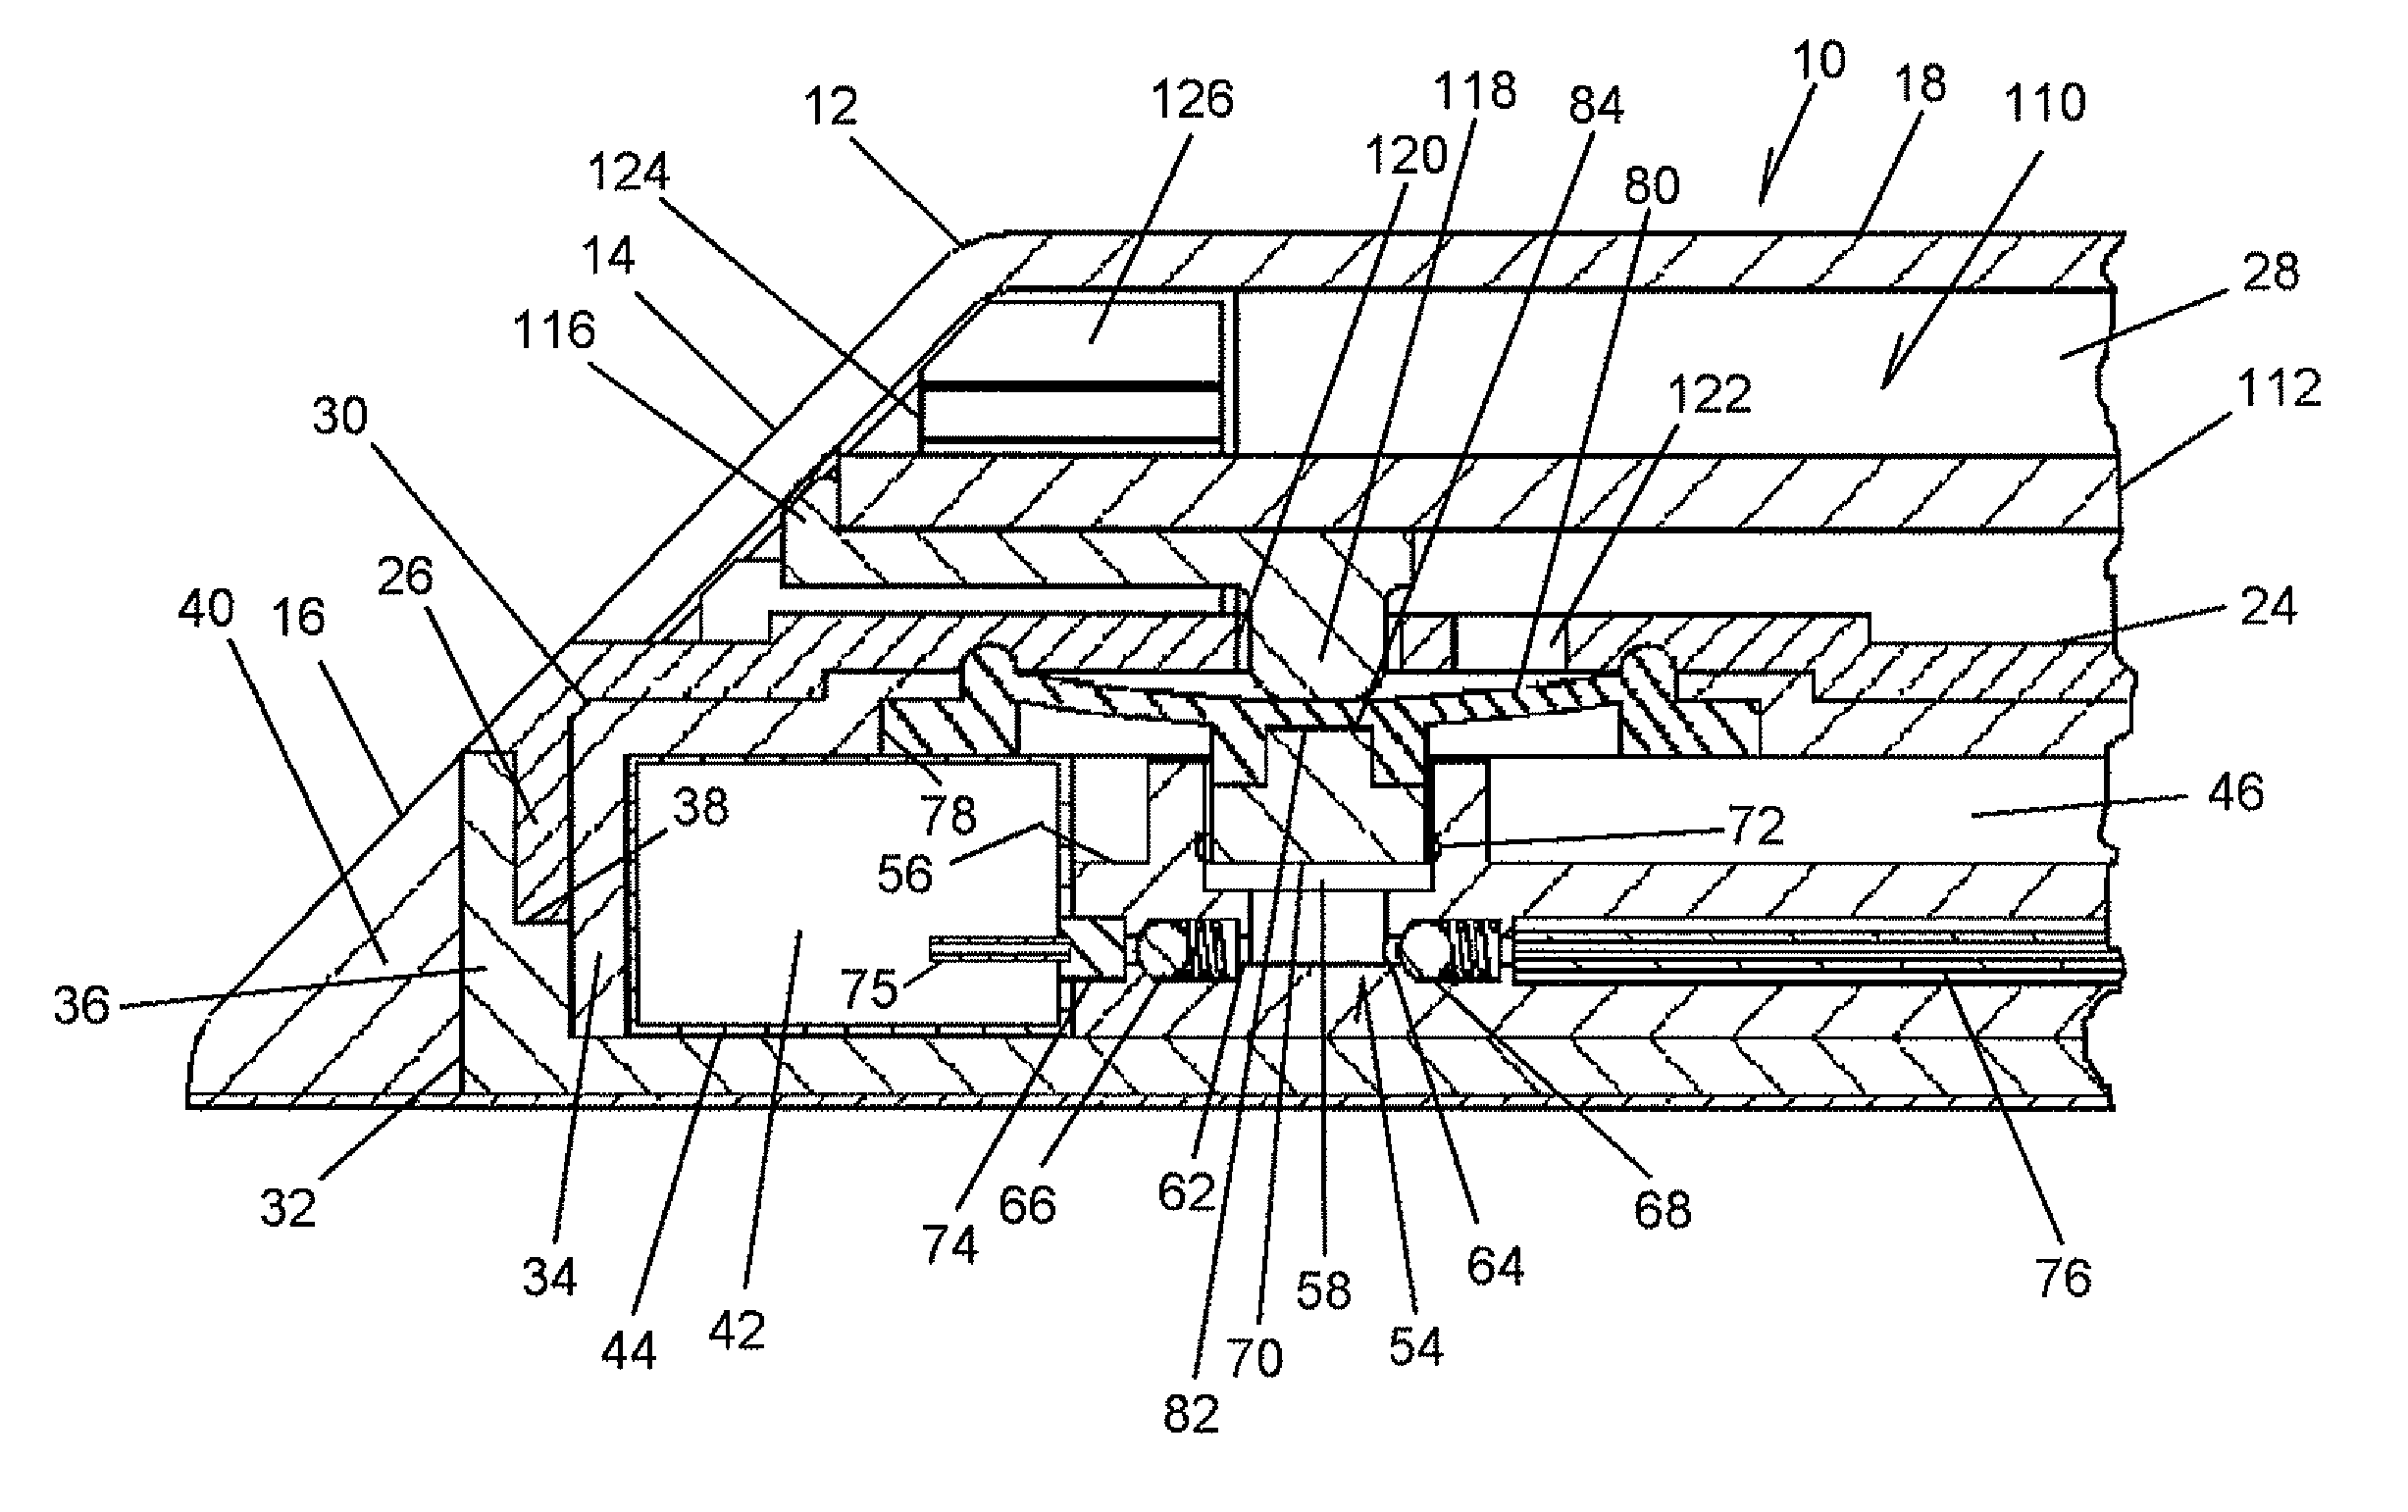 Apparatus for infusing liquid to a body